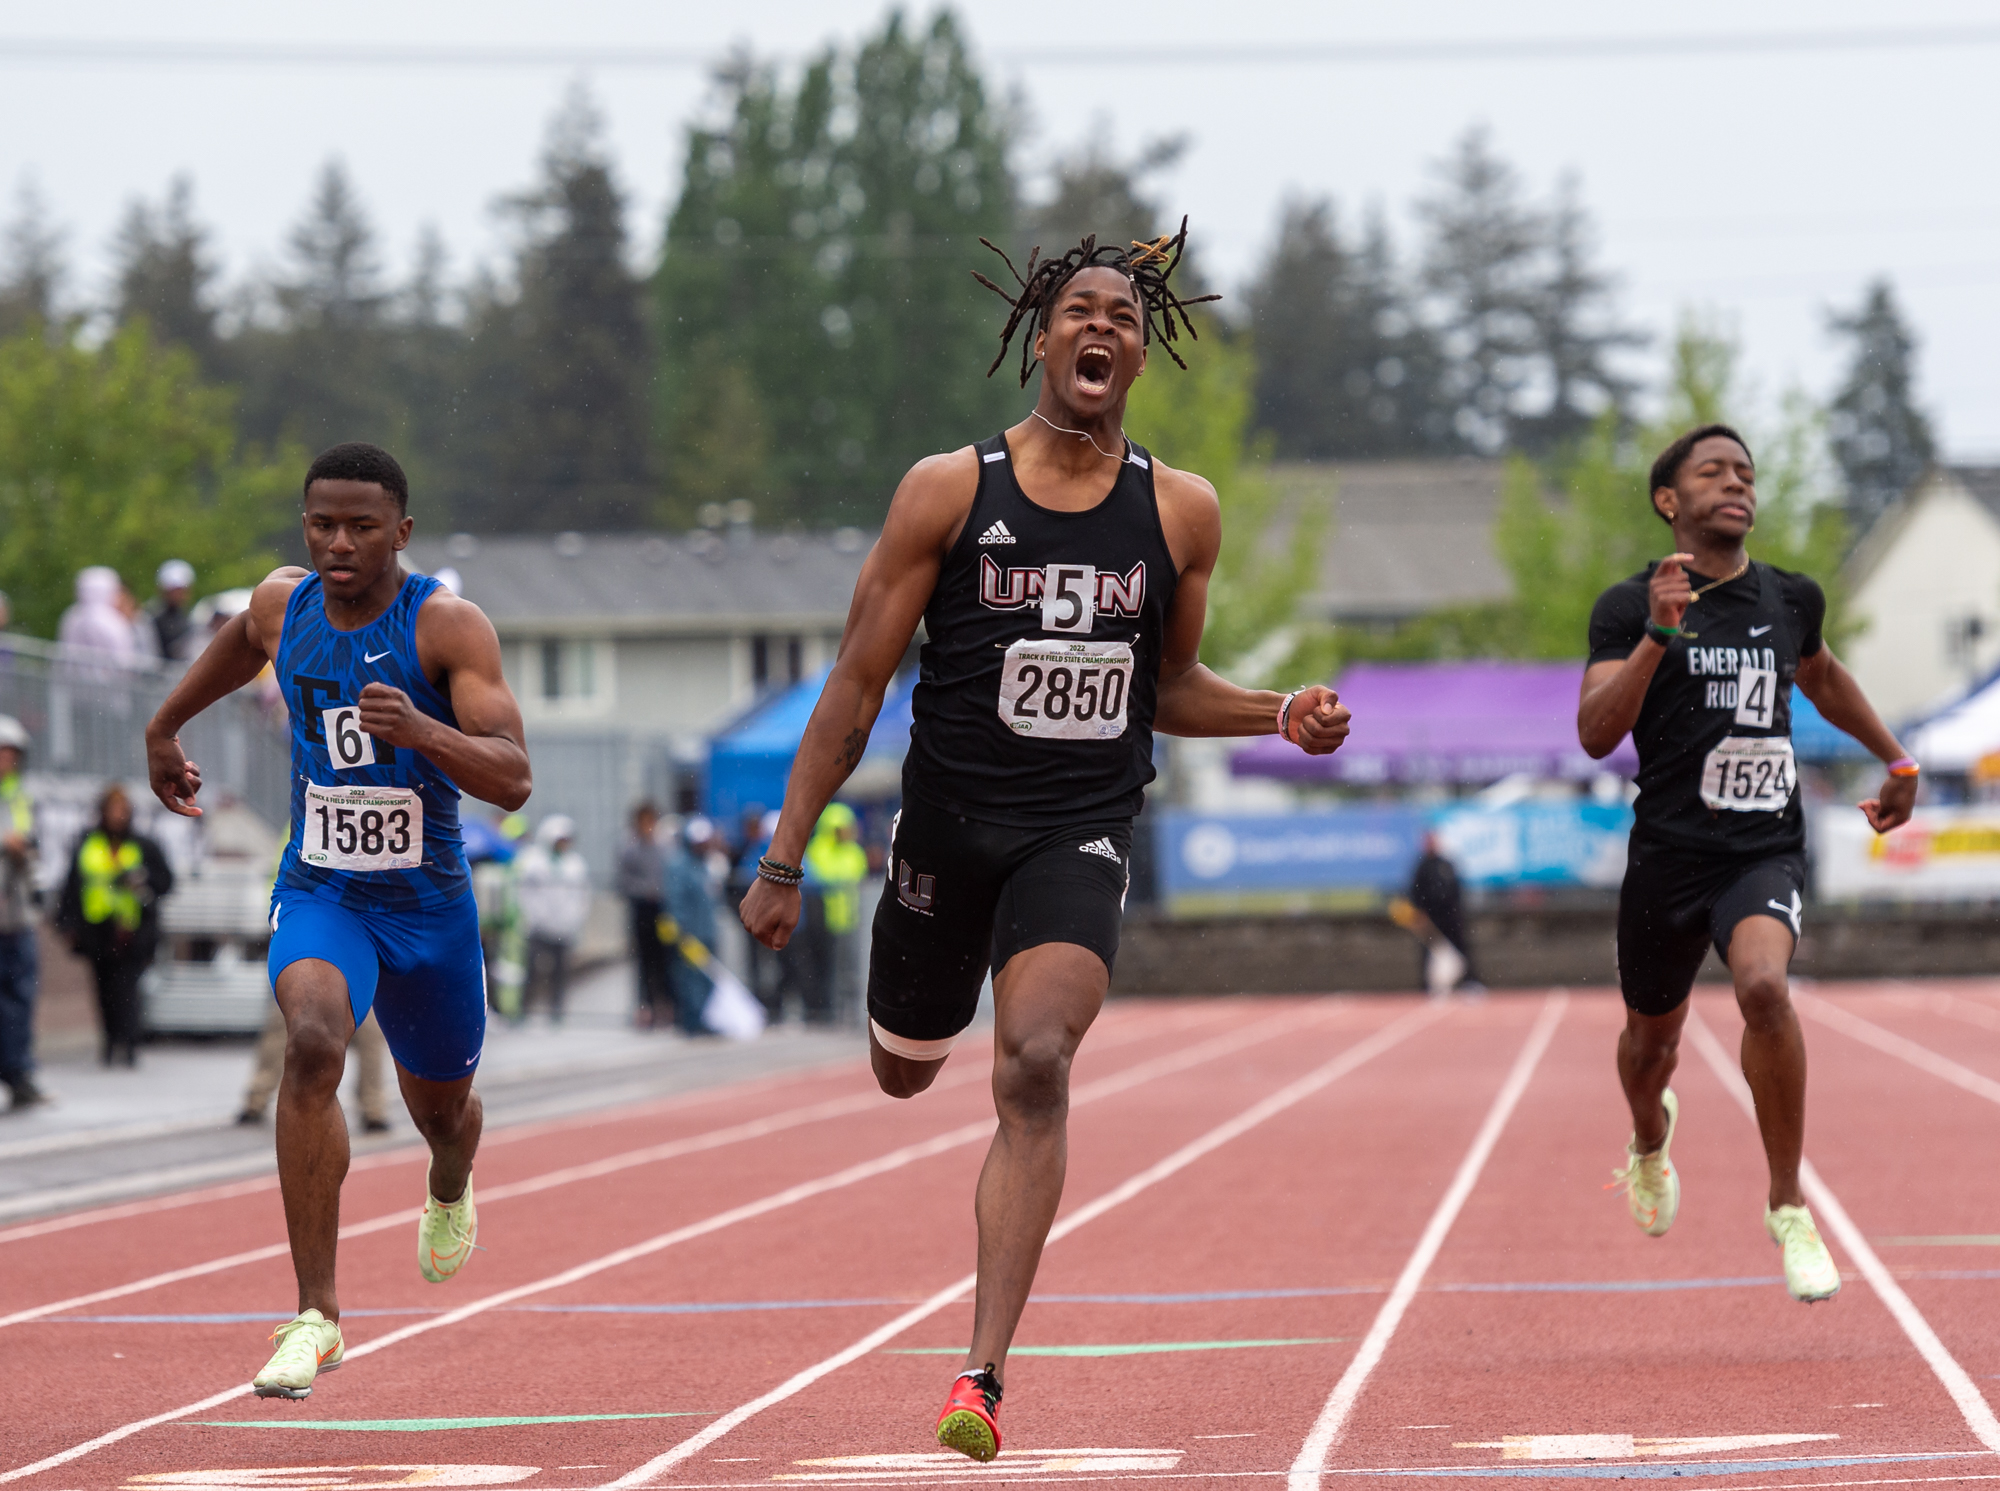 Union's Tobias Merriweather roars as he crosses the finish line as champion of the 4A Boys 200 with a personal best time of 21.80 seconds at the 4A/3A/2A State Track and Field Championships on Saturday, May 28, 2022, at Mount Tahoma High School in Tacoma.